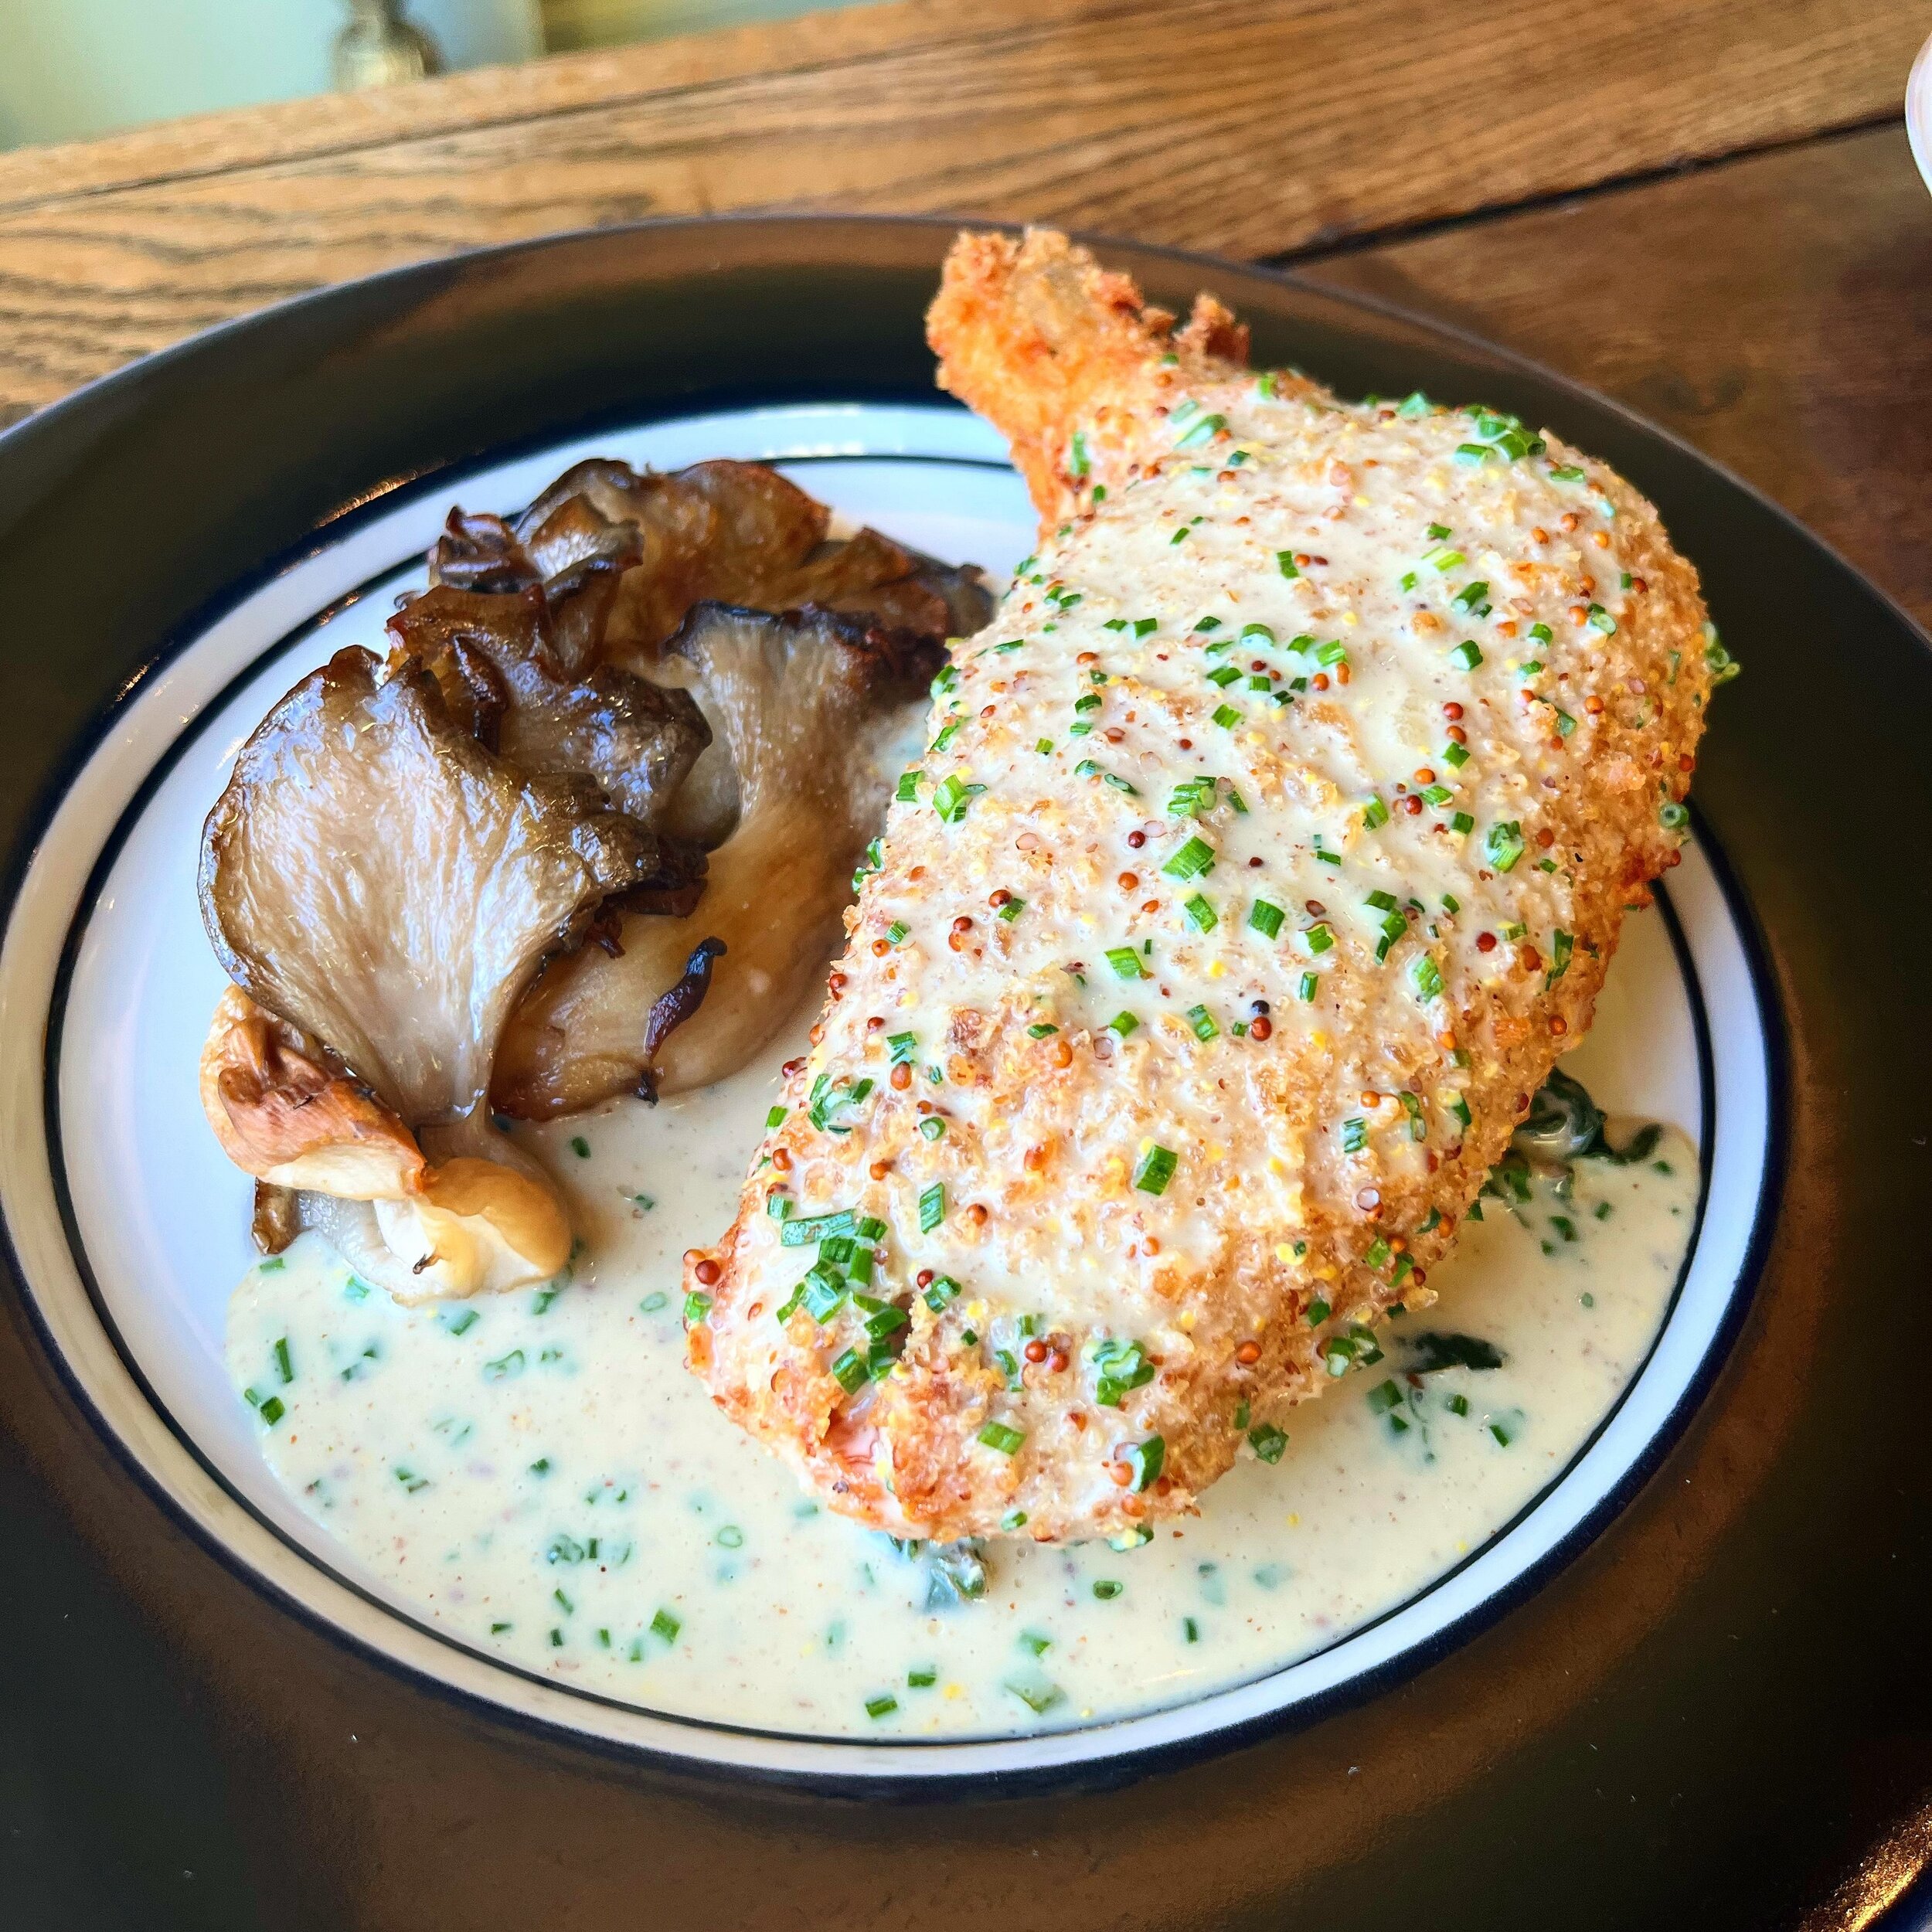 If you haven&rsquo;t had our signature Chicken Cordon Bleu, what are you waiting for? 

An absolute delight, these flavorful chicken breasts are stuffed with gruyere and smoked bacon and finished with a bright mustard sauce. Served with braised green